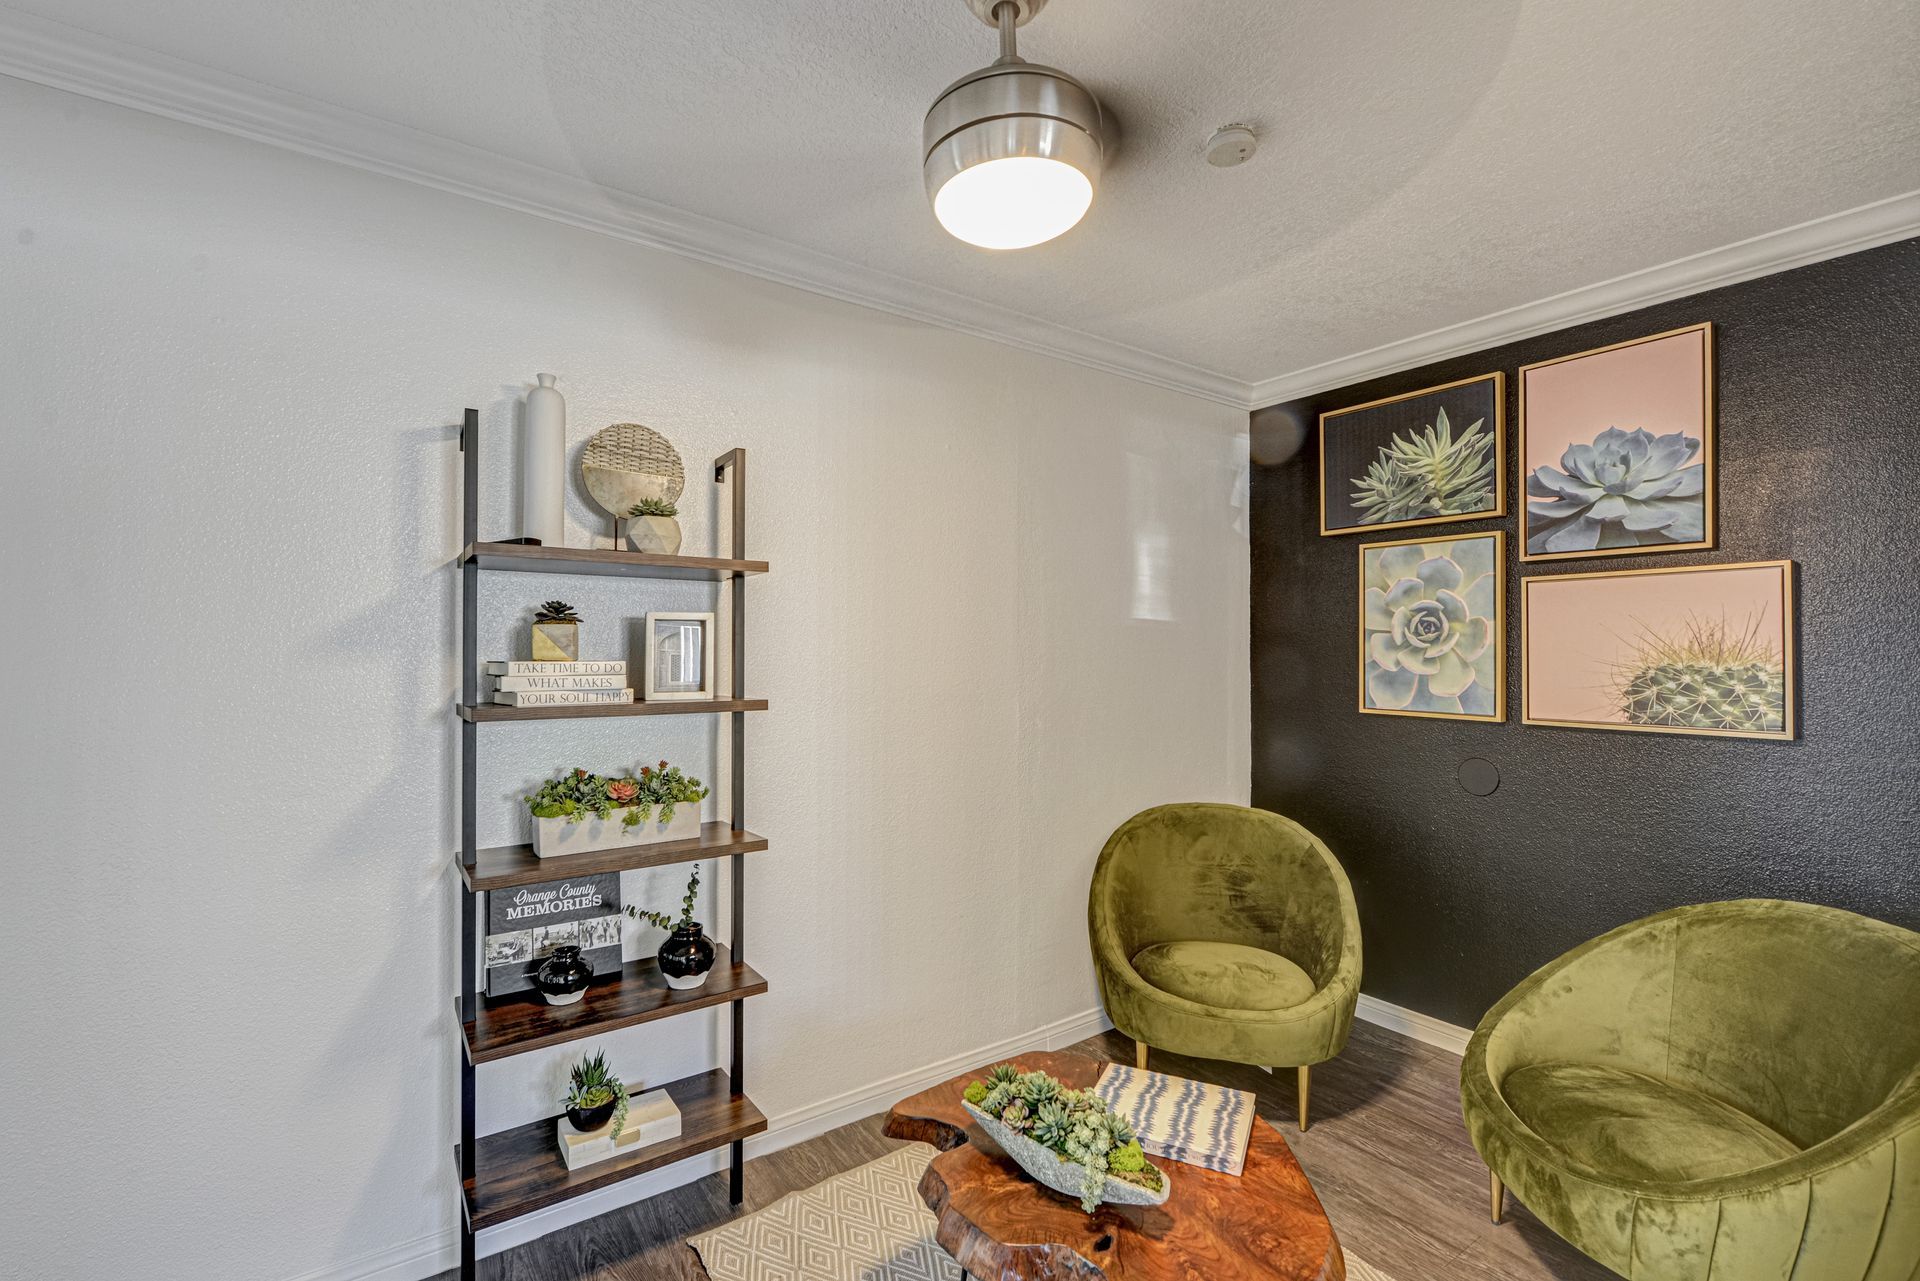 Sliding Photo Gallery Displaying Apartment Features